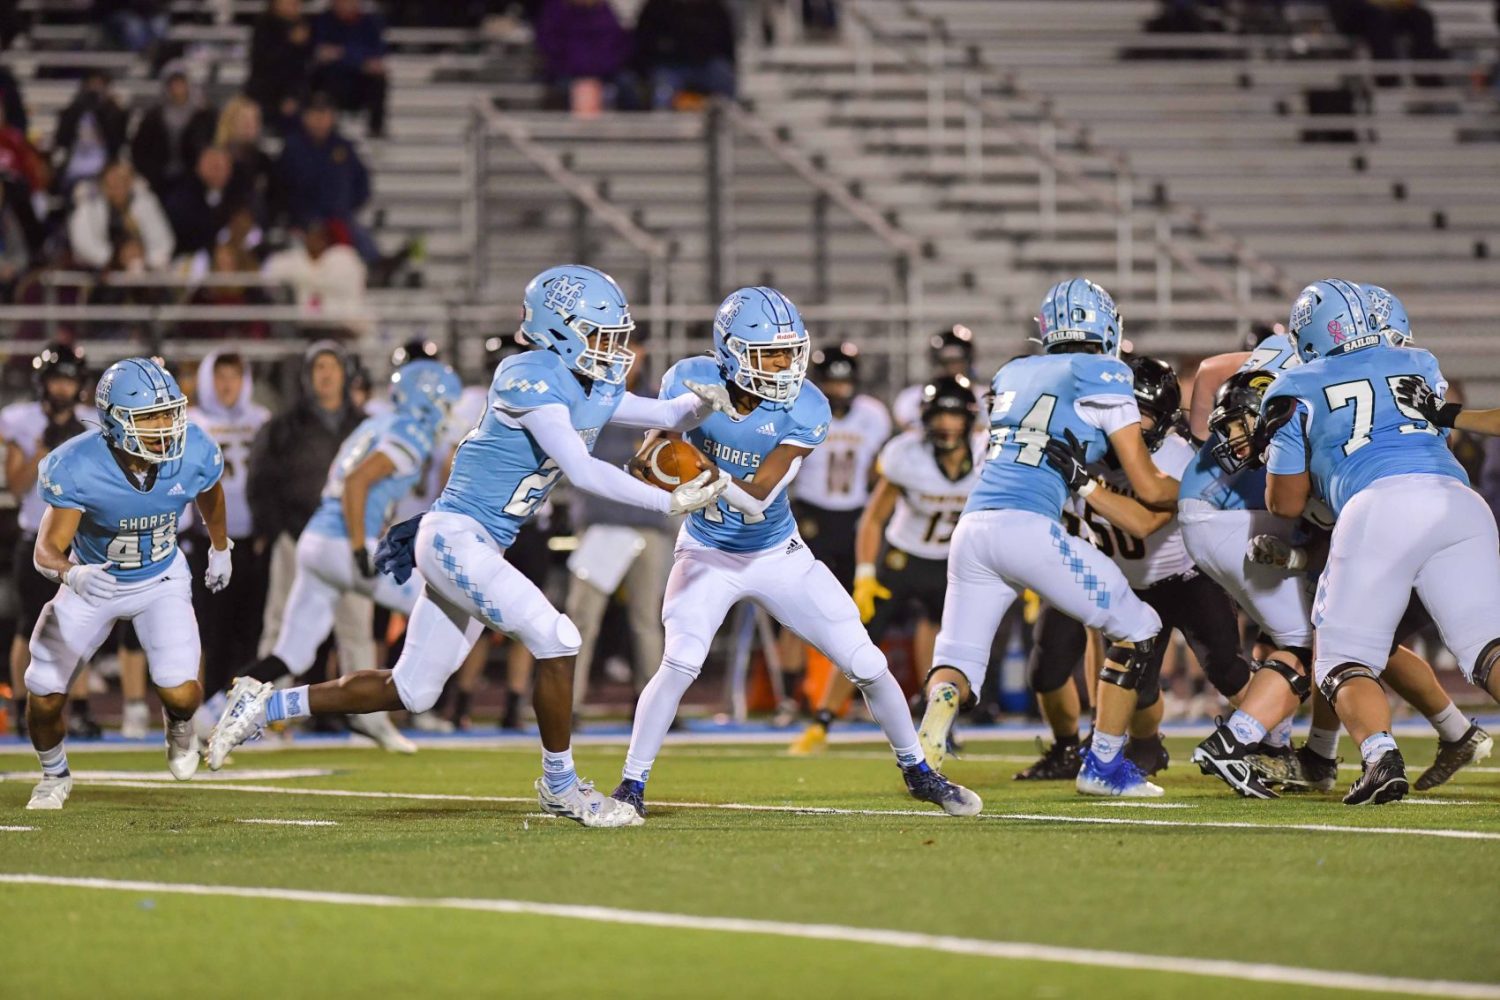 First-half dominance carries Mona Shores to opening-round victory, 48-20